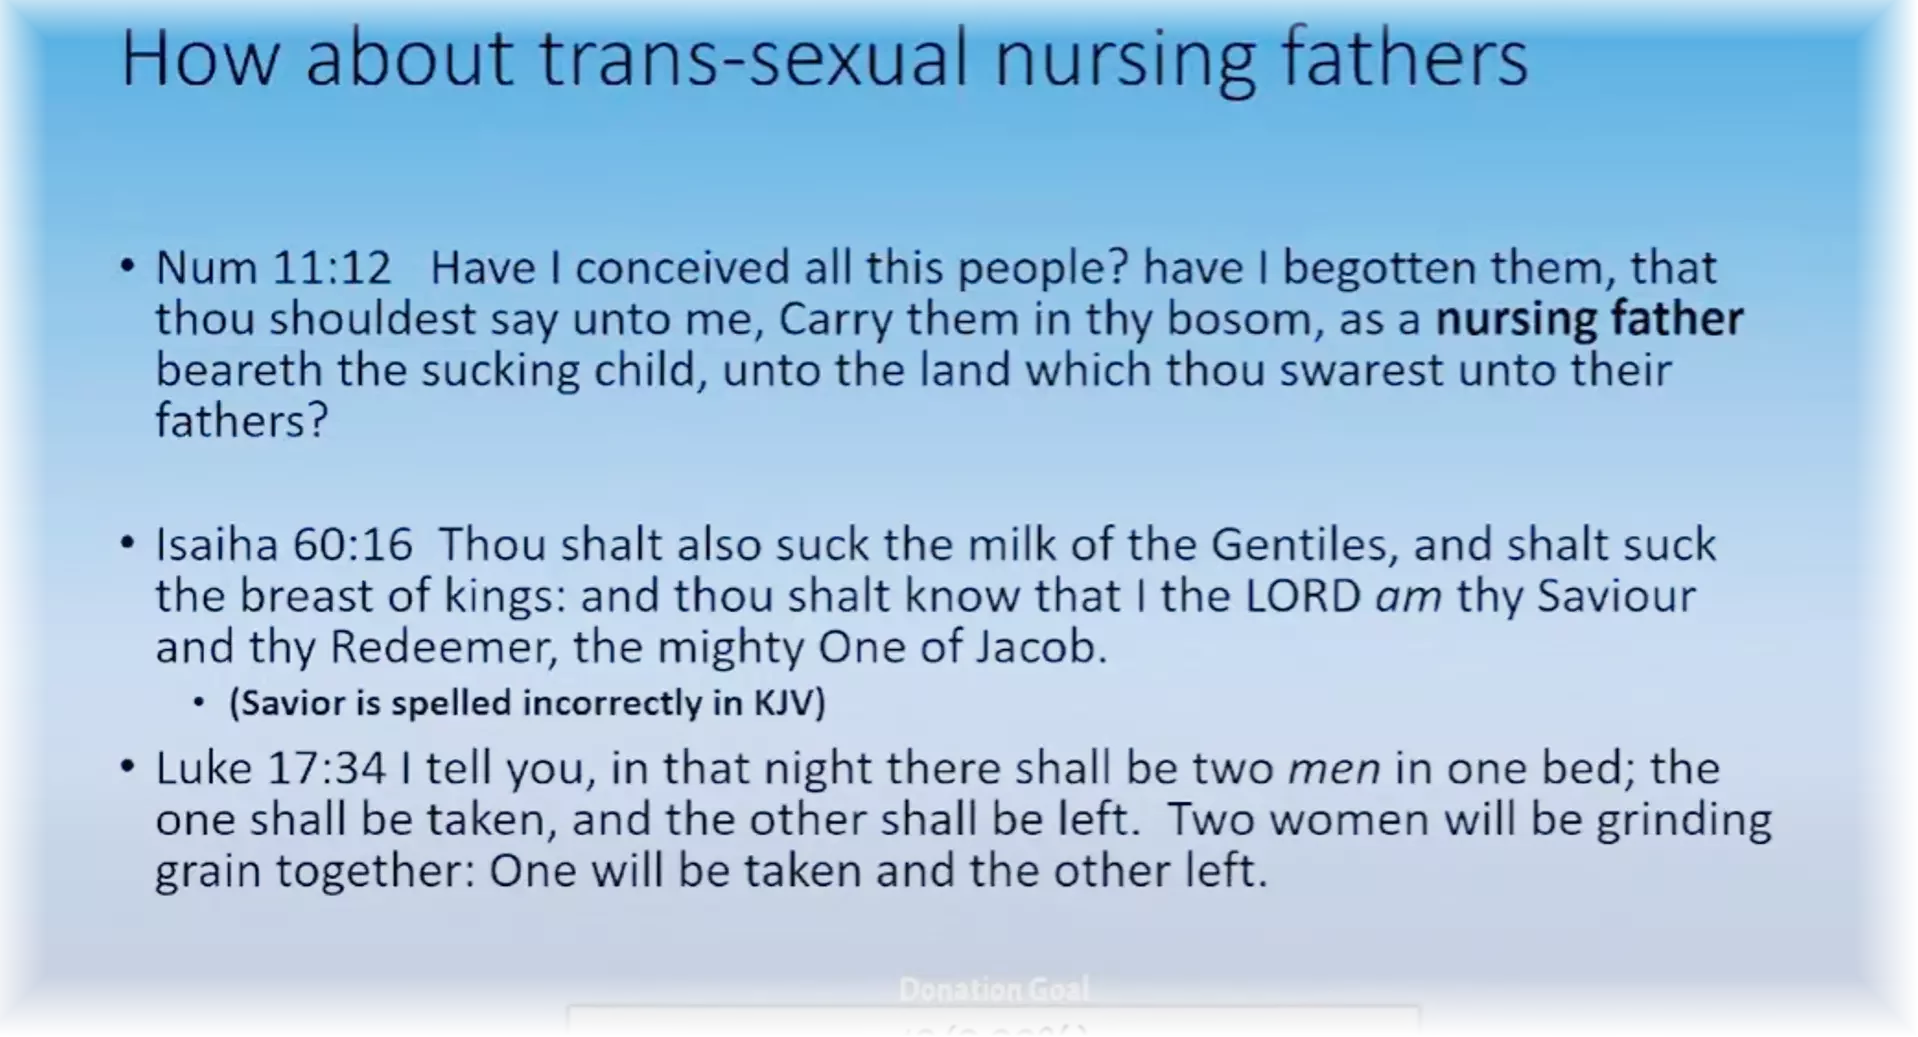 NUSING FATHER IN BIBLE